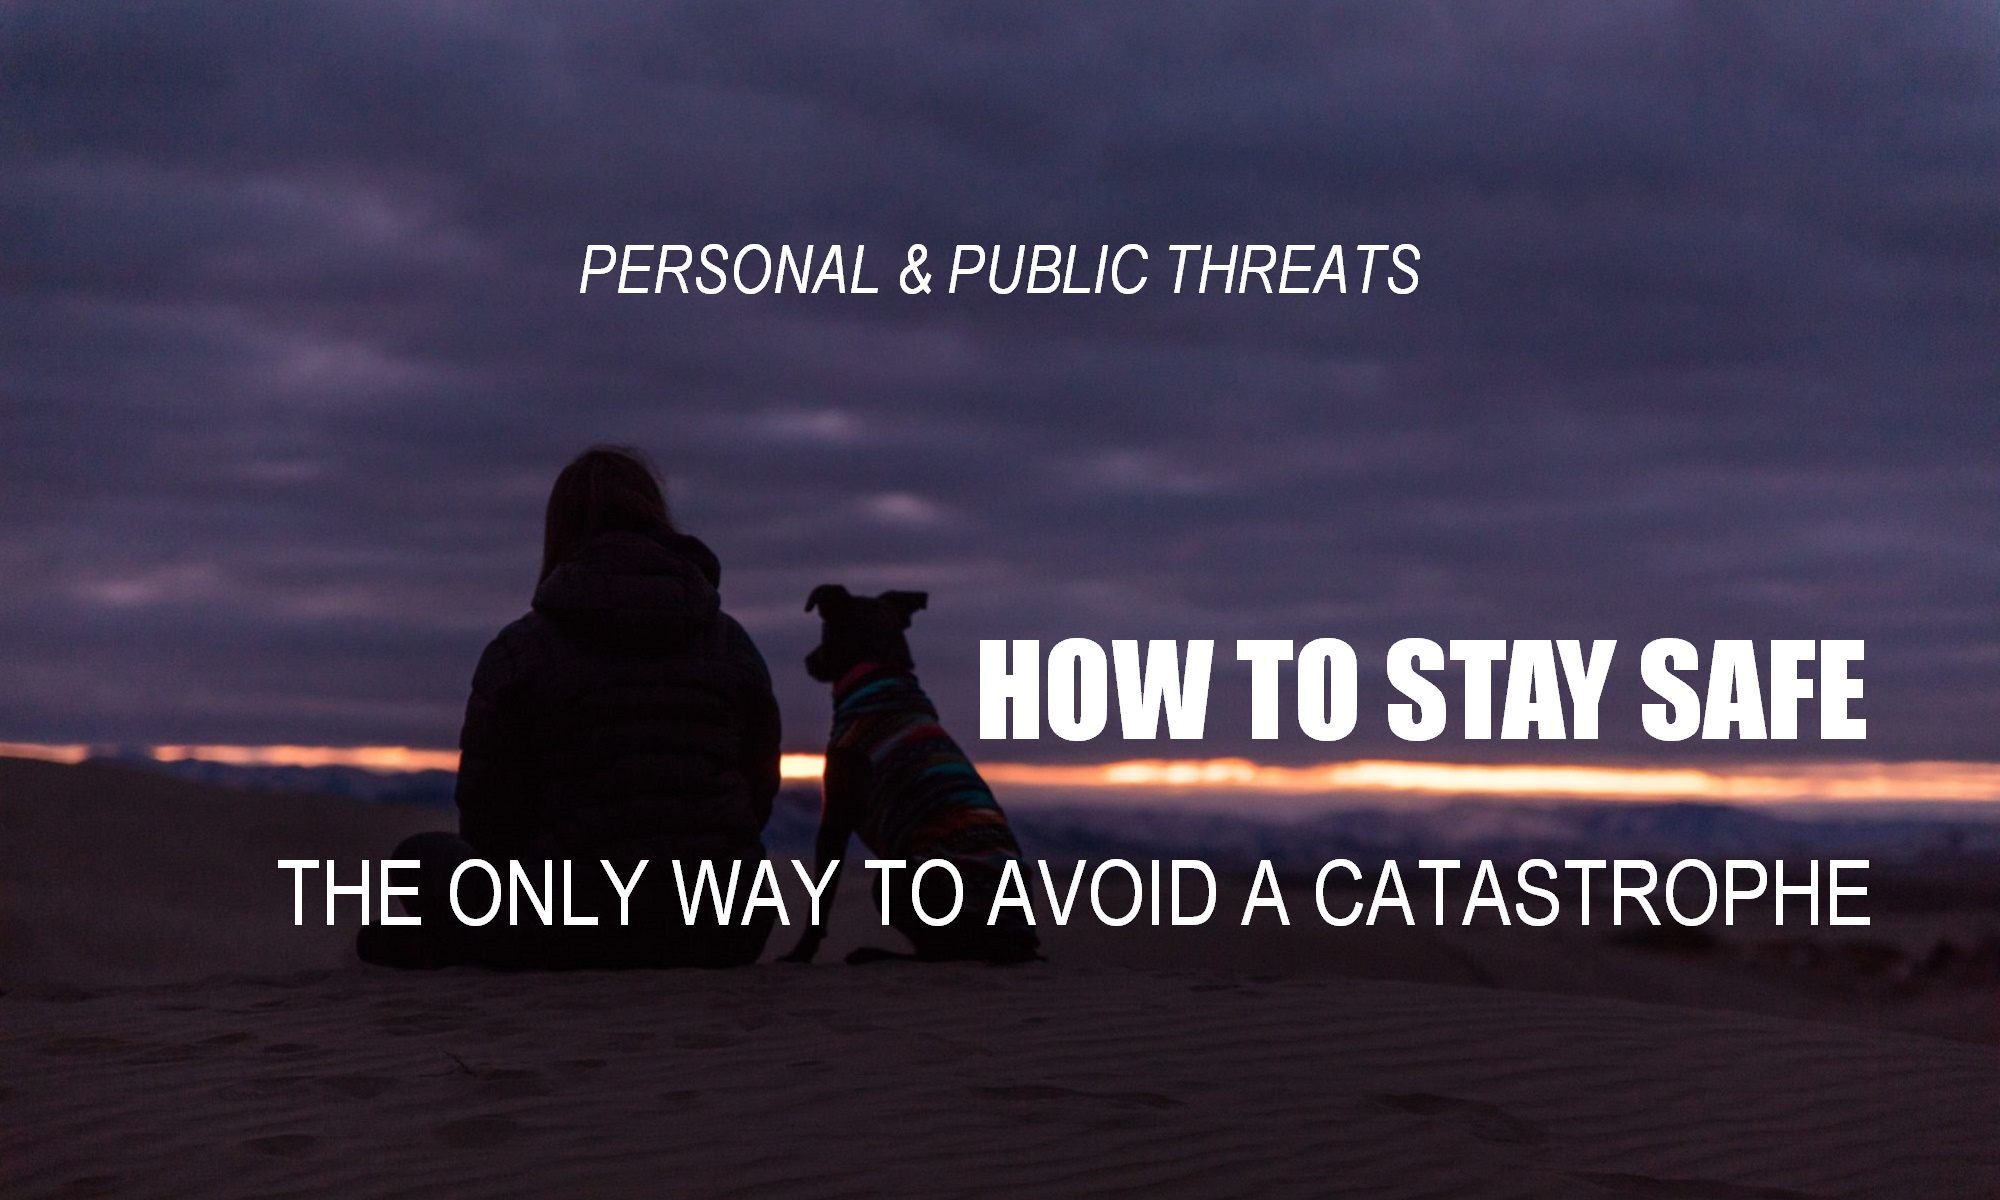 Woman on beach at sunset is safe. Learn how to stay safe. The only way to avoid a catastrophe and create a safe future.